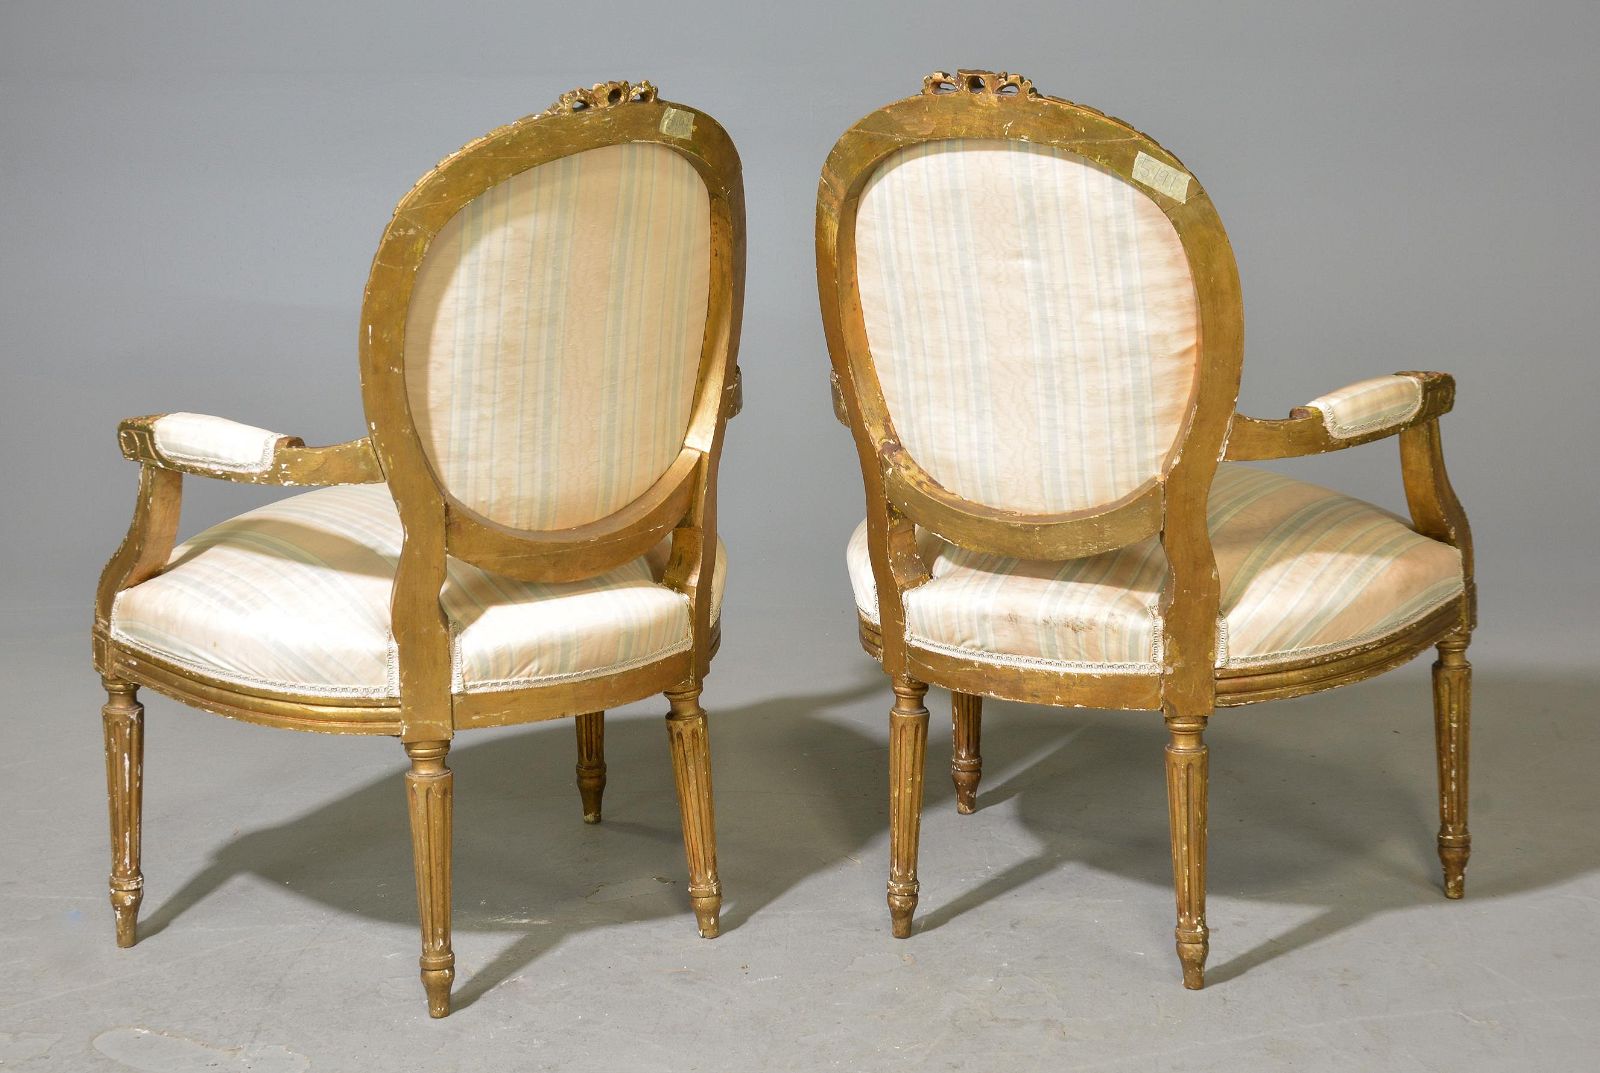 Pair of Louis XVI gilded armchairs with cane seat and back